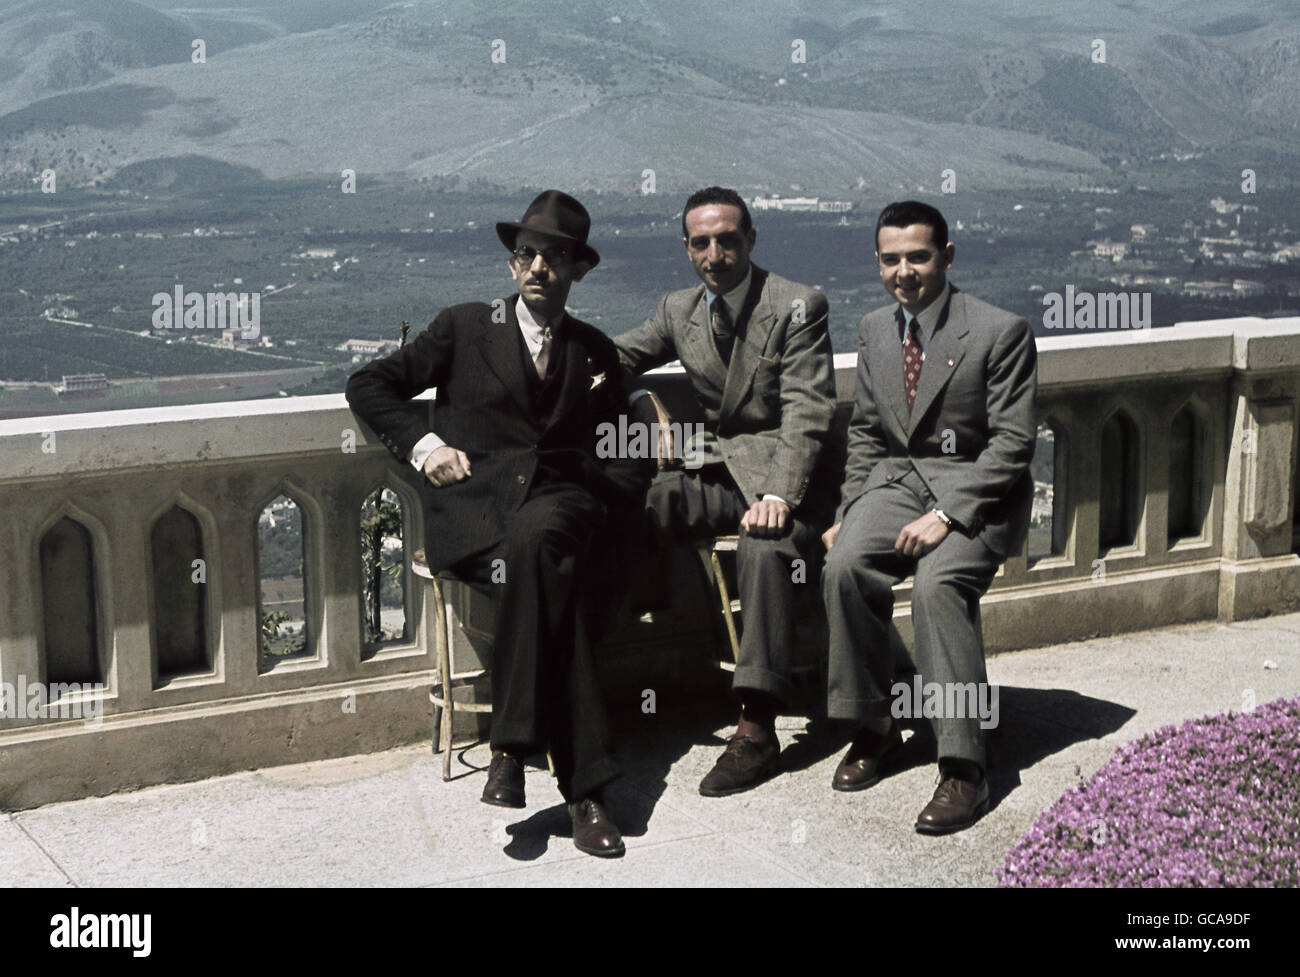 geography / travel, Italy, people, three men wearing suits and sitting on chairs, Palermo, April 1940, Additional-Rights-Clearences-Not Available Stock Photo